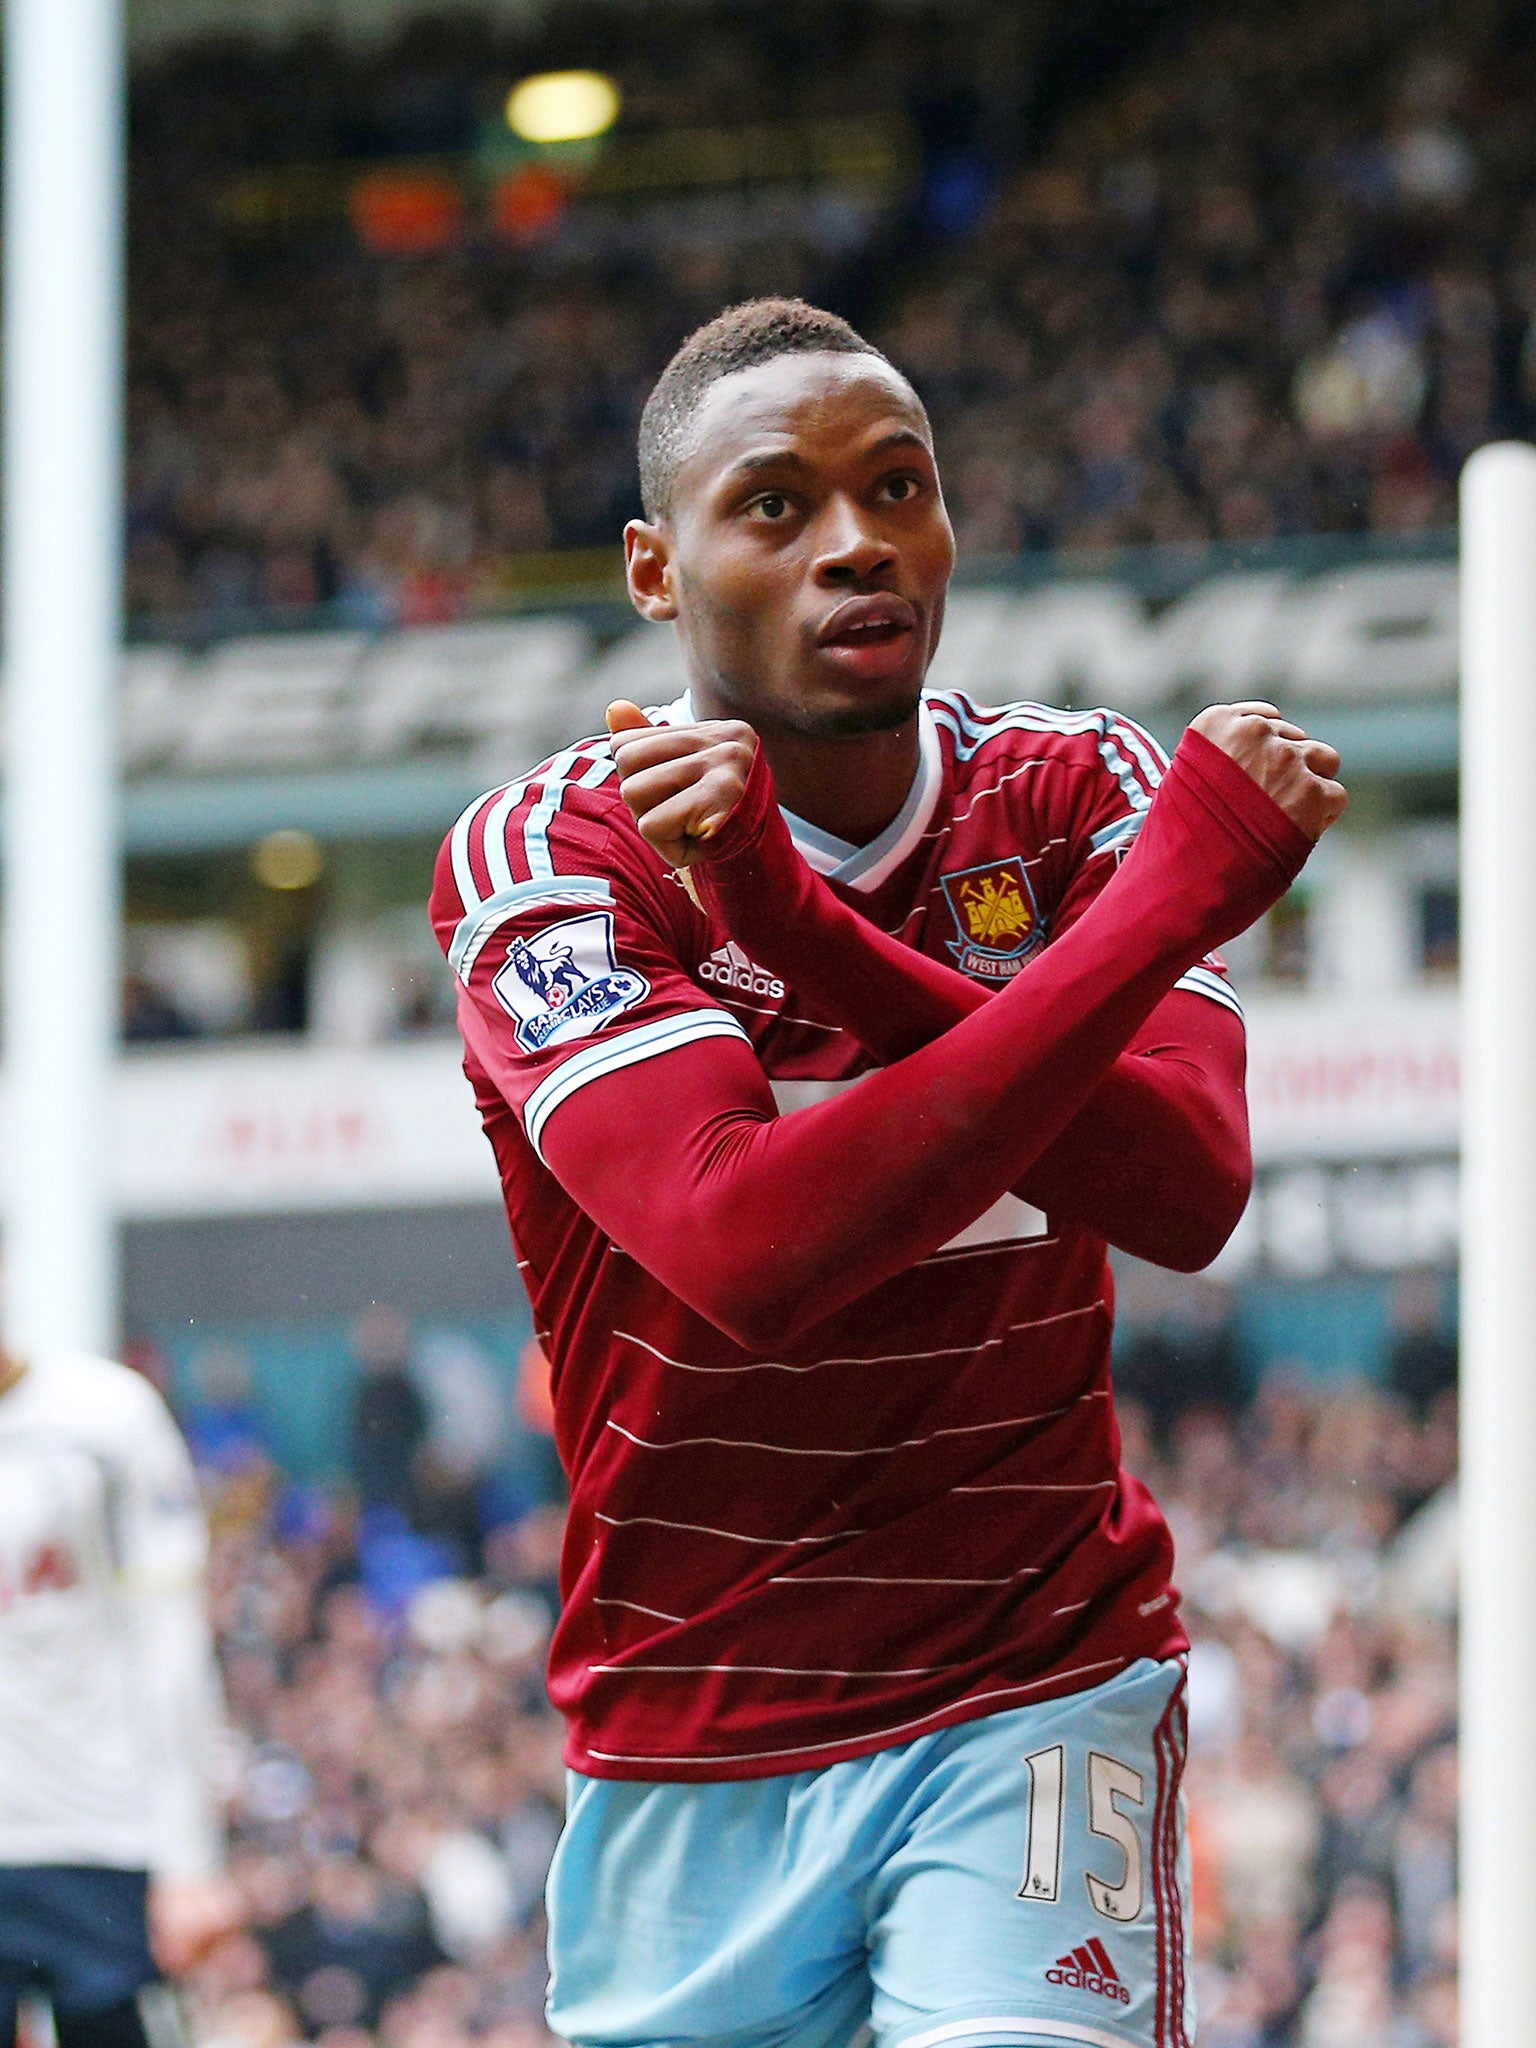 West Ham's Diafra Sakho was held after being questioned over an alleged assault earlier this month